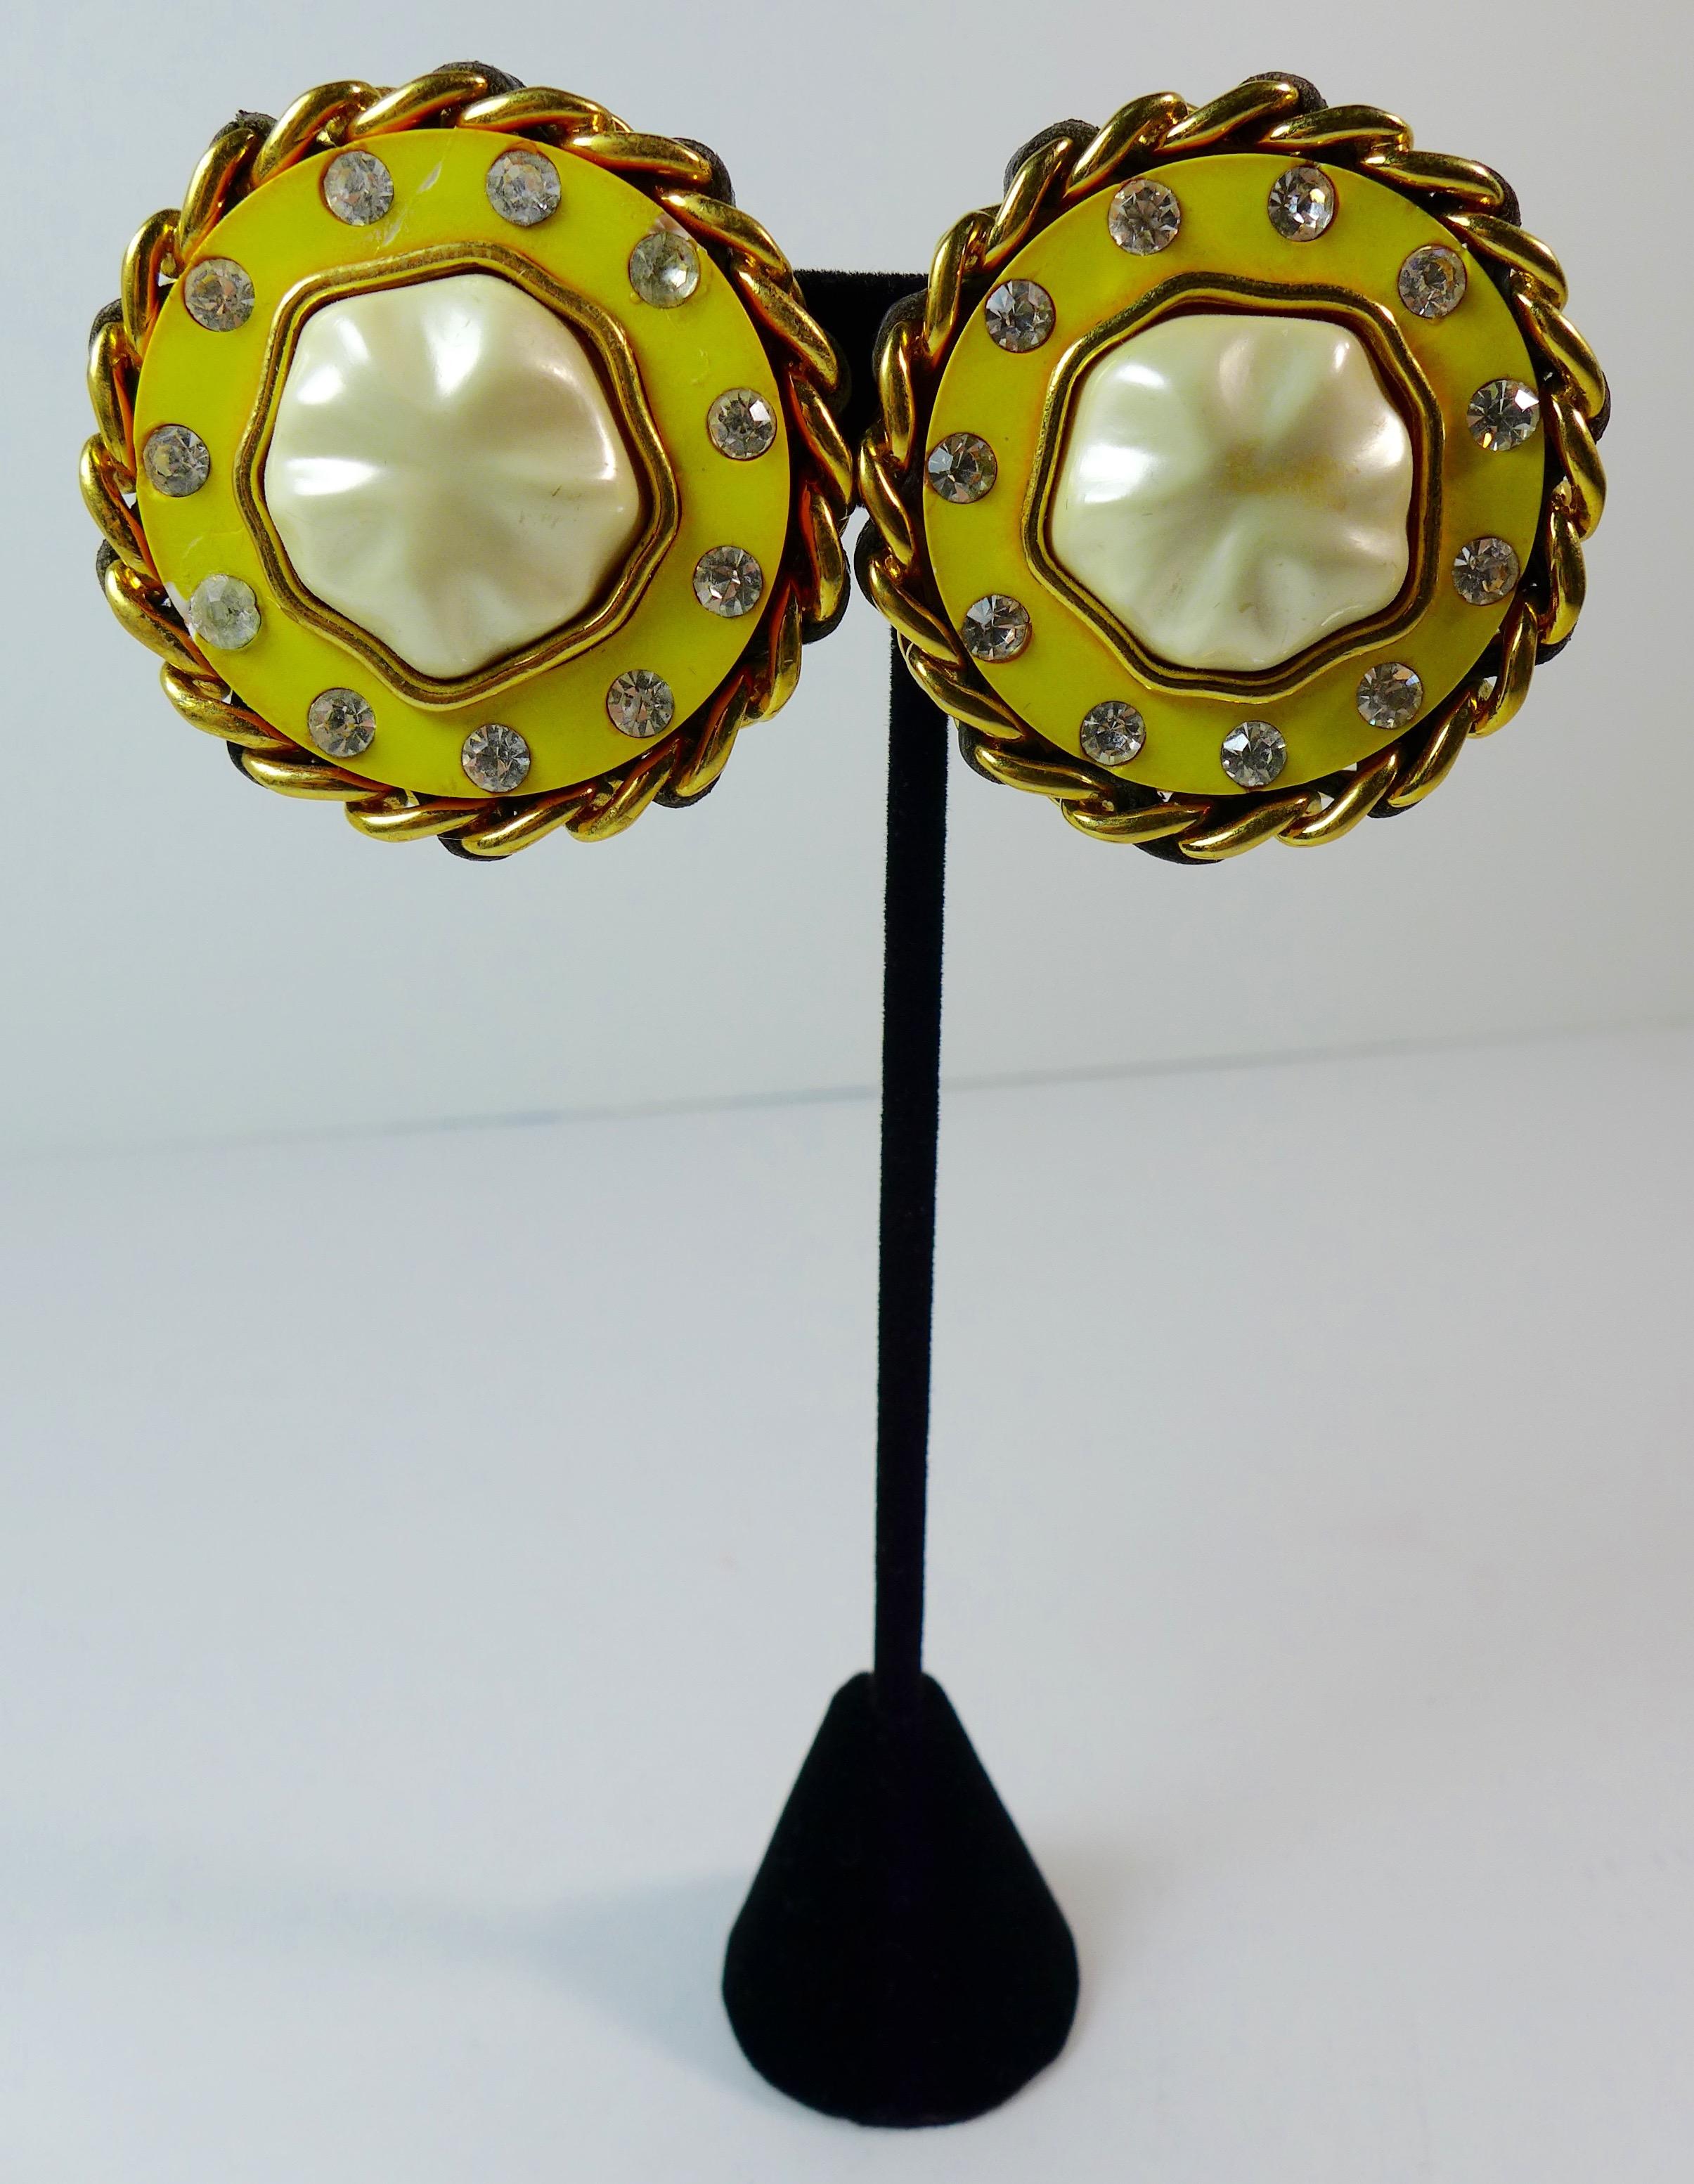 These Chanel clip on earrings feature a pearl center, yellow enamel with rhinestones, and a gold chain trim. Made in France. 